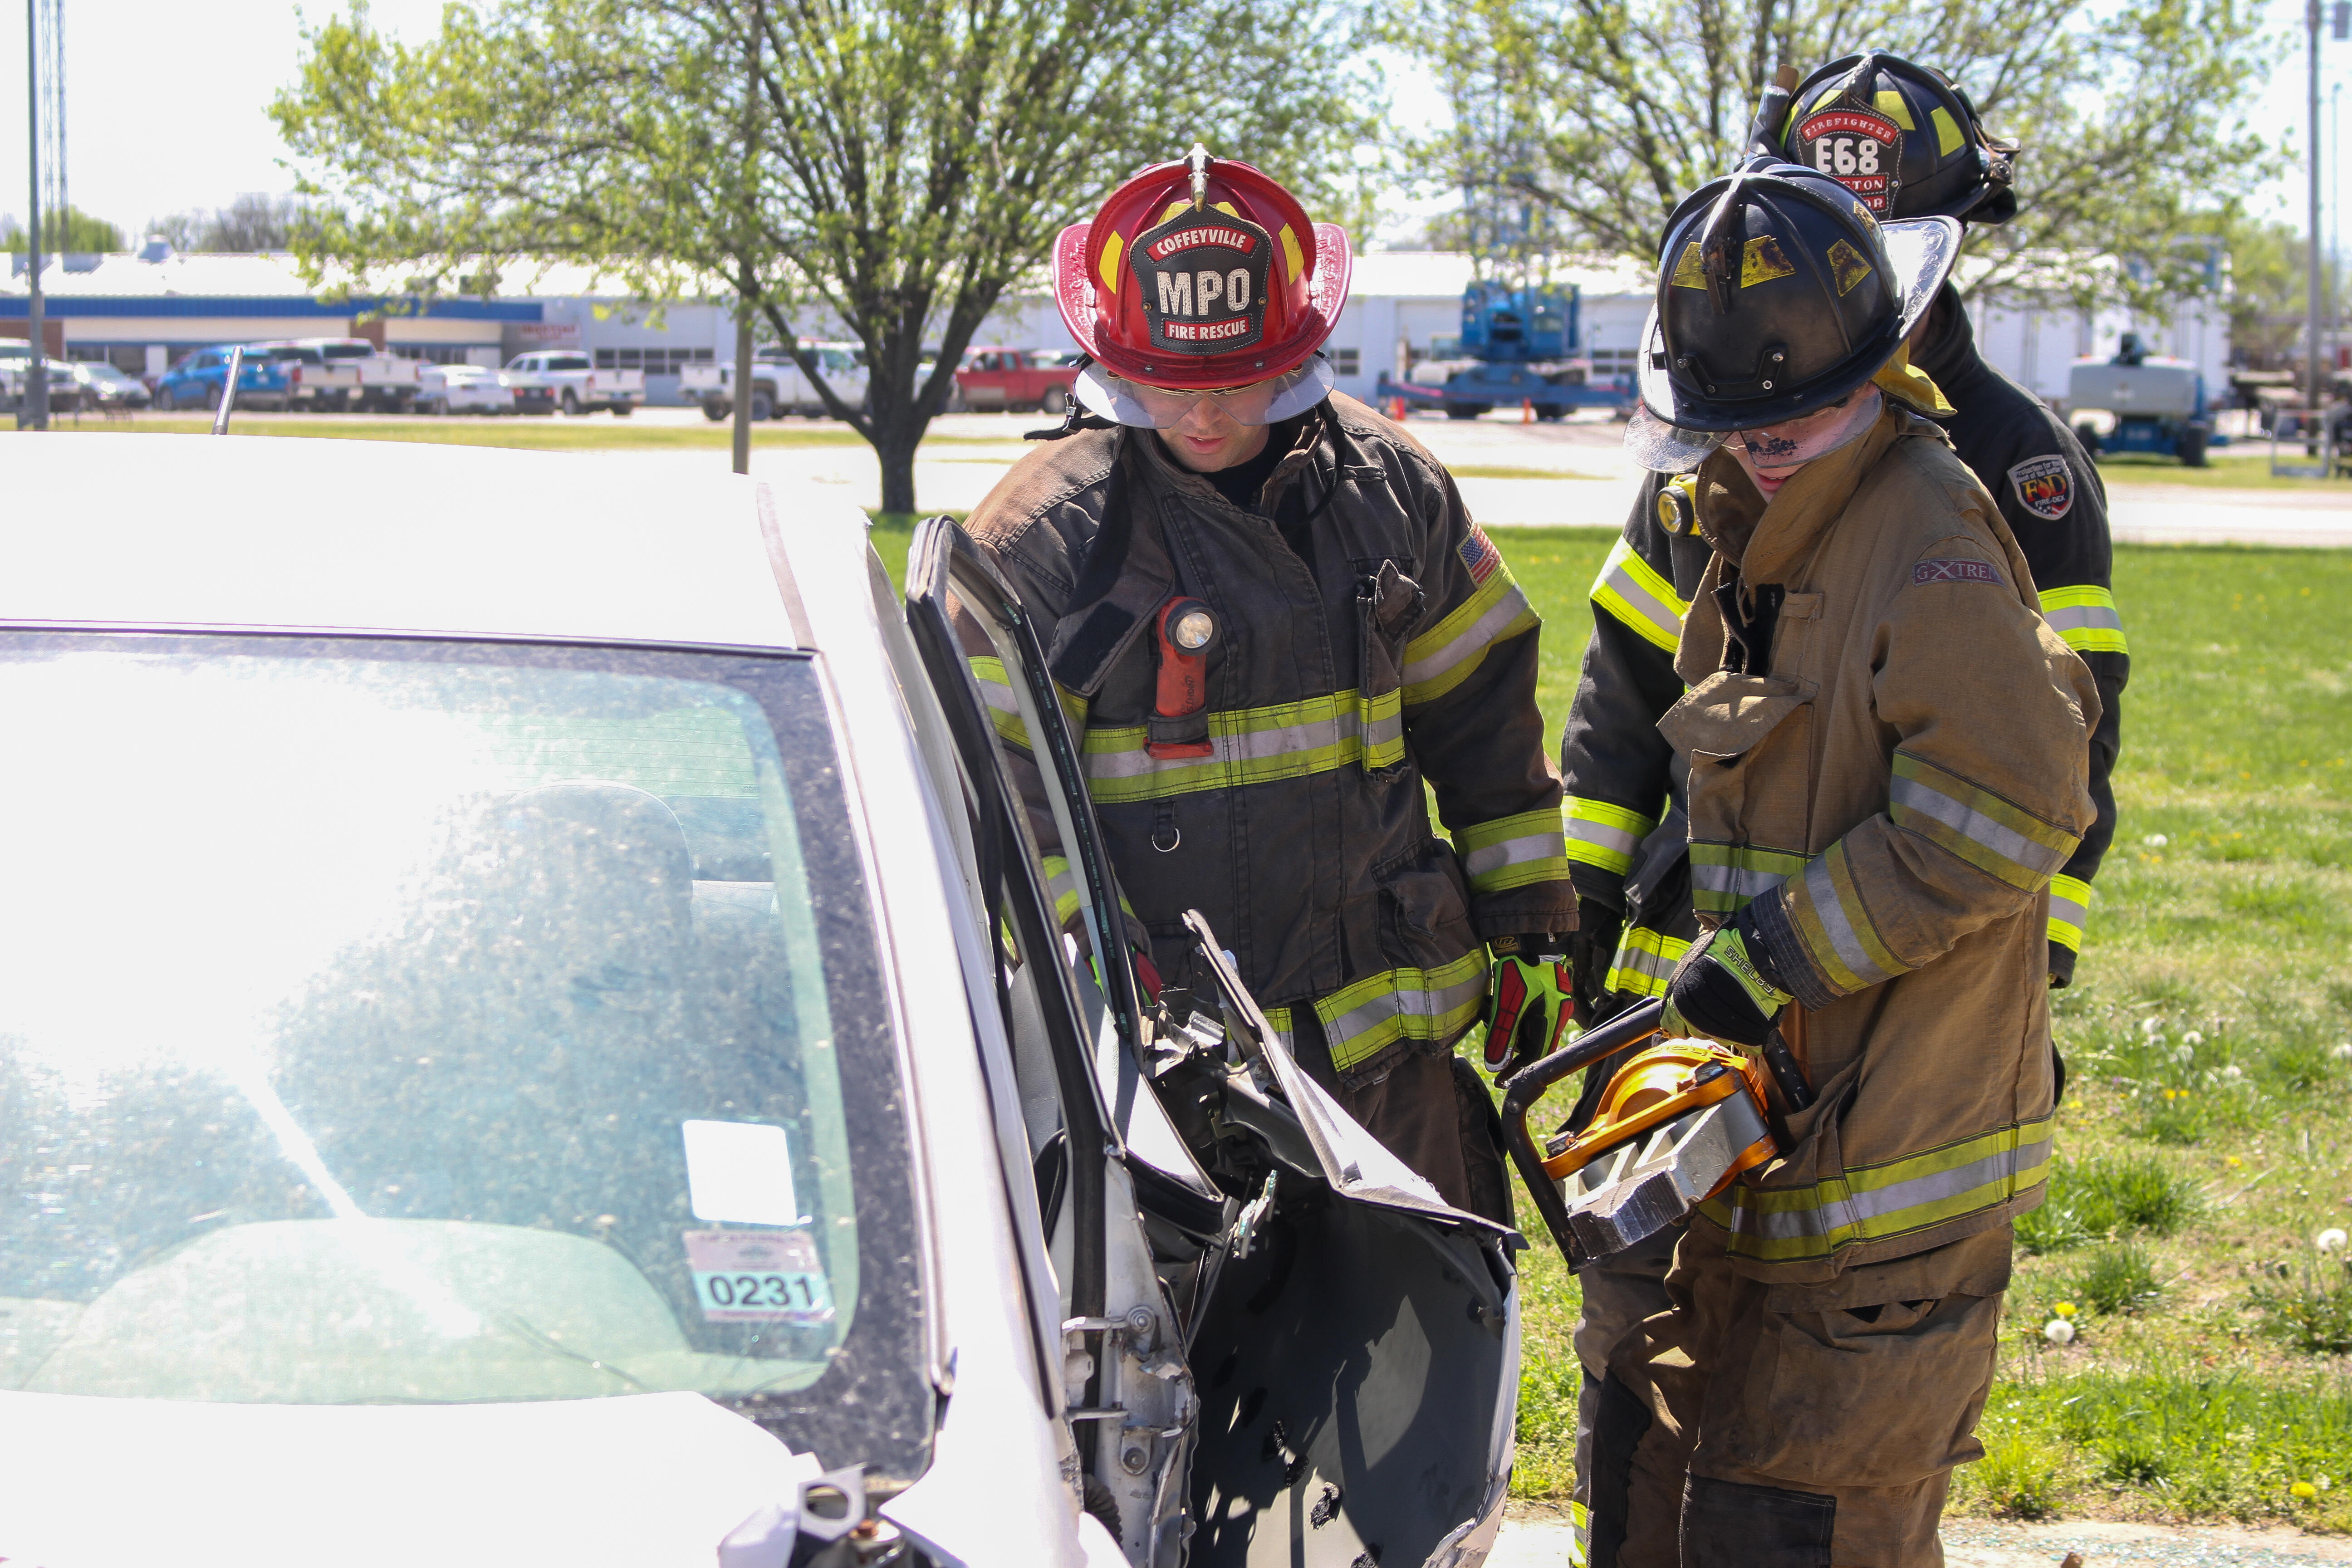 Fire Science students using the Jaws of Life